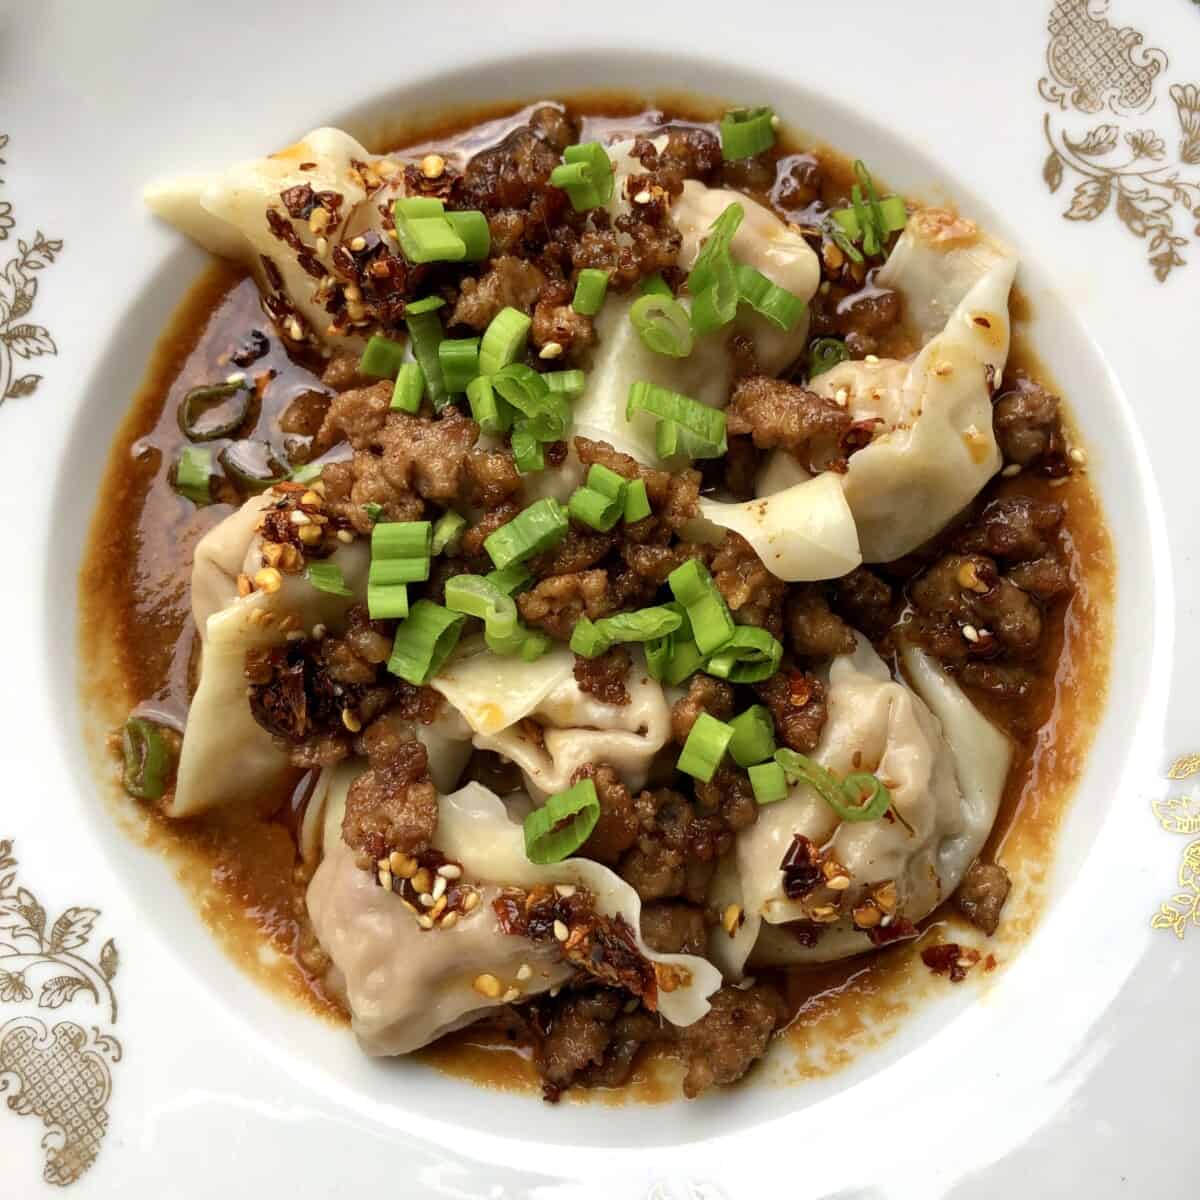 sichuan wontons resting in a bowl on top of sauce and topped with crispy fried pork and scallions without yet being mixed in together